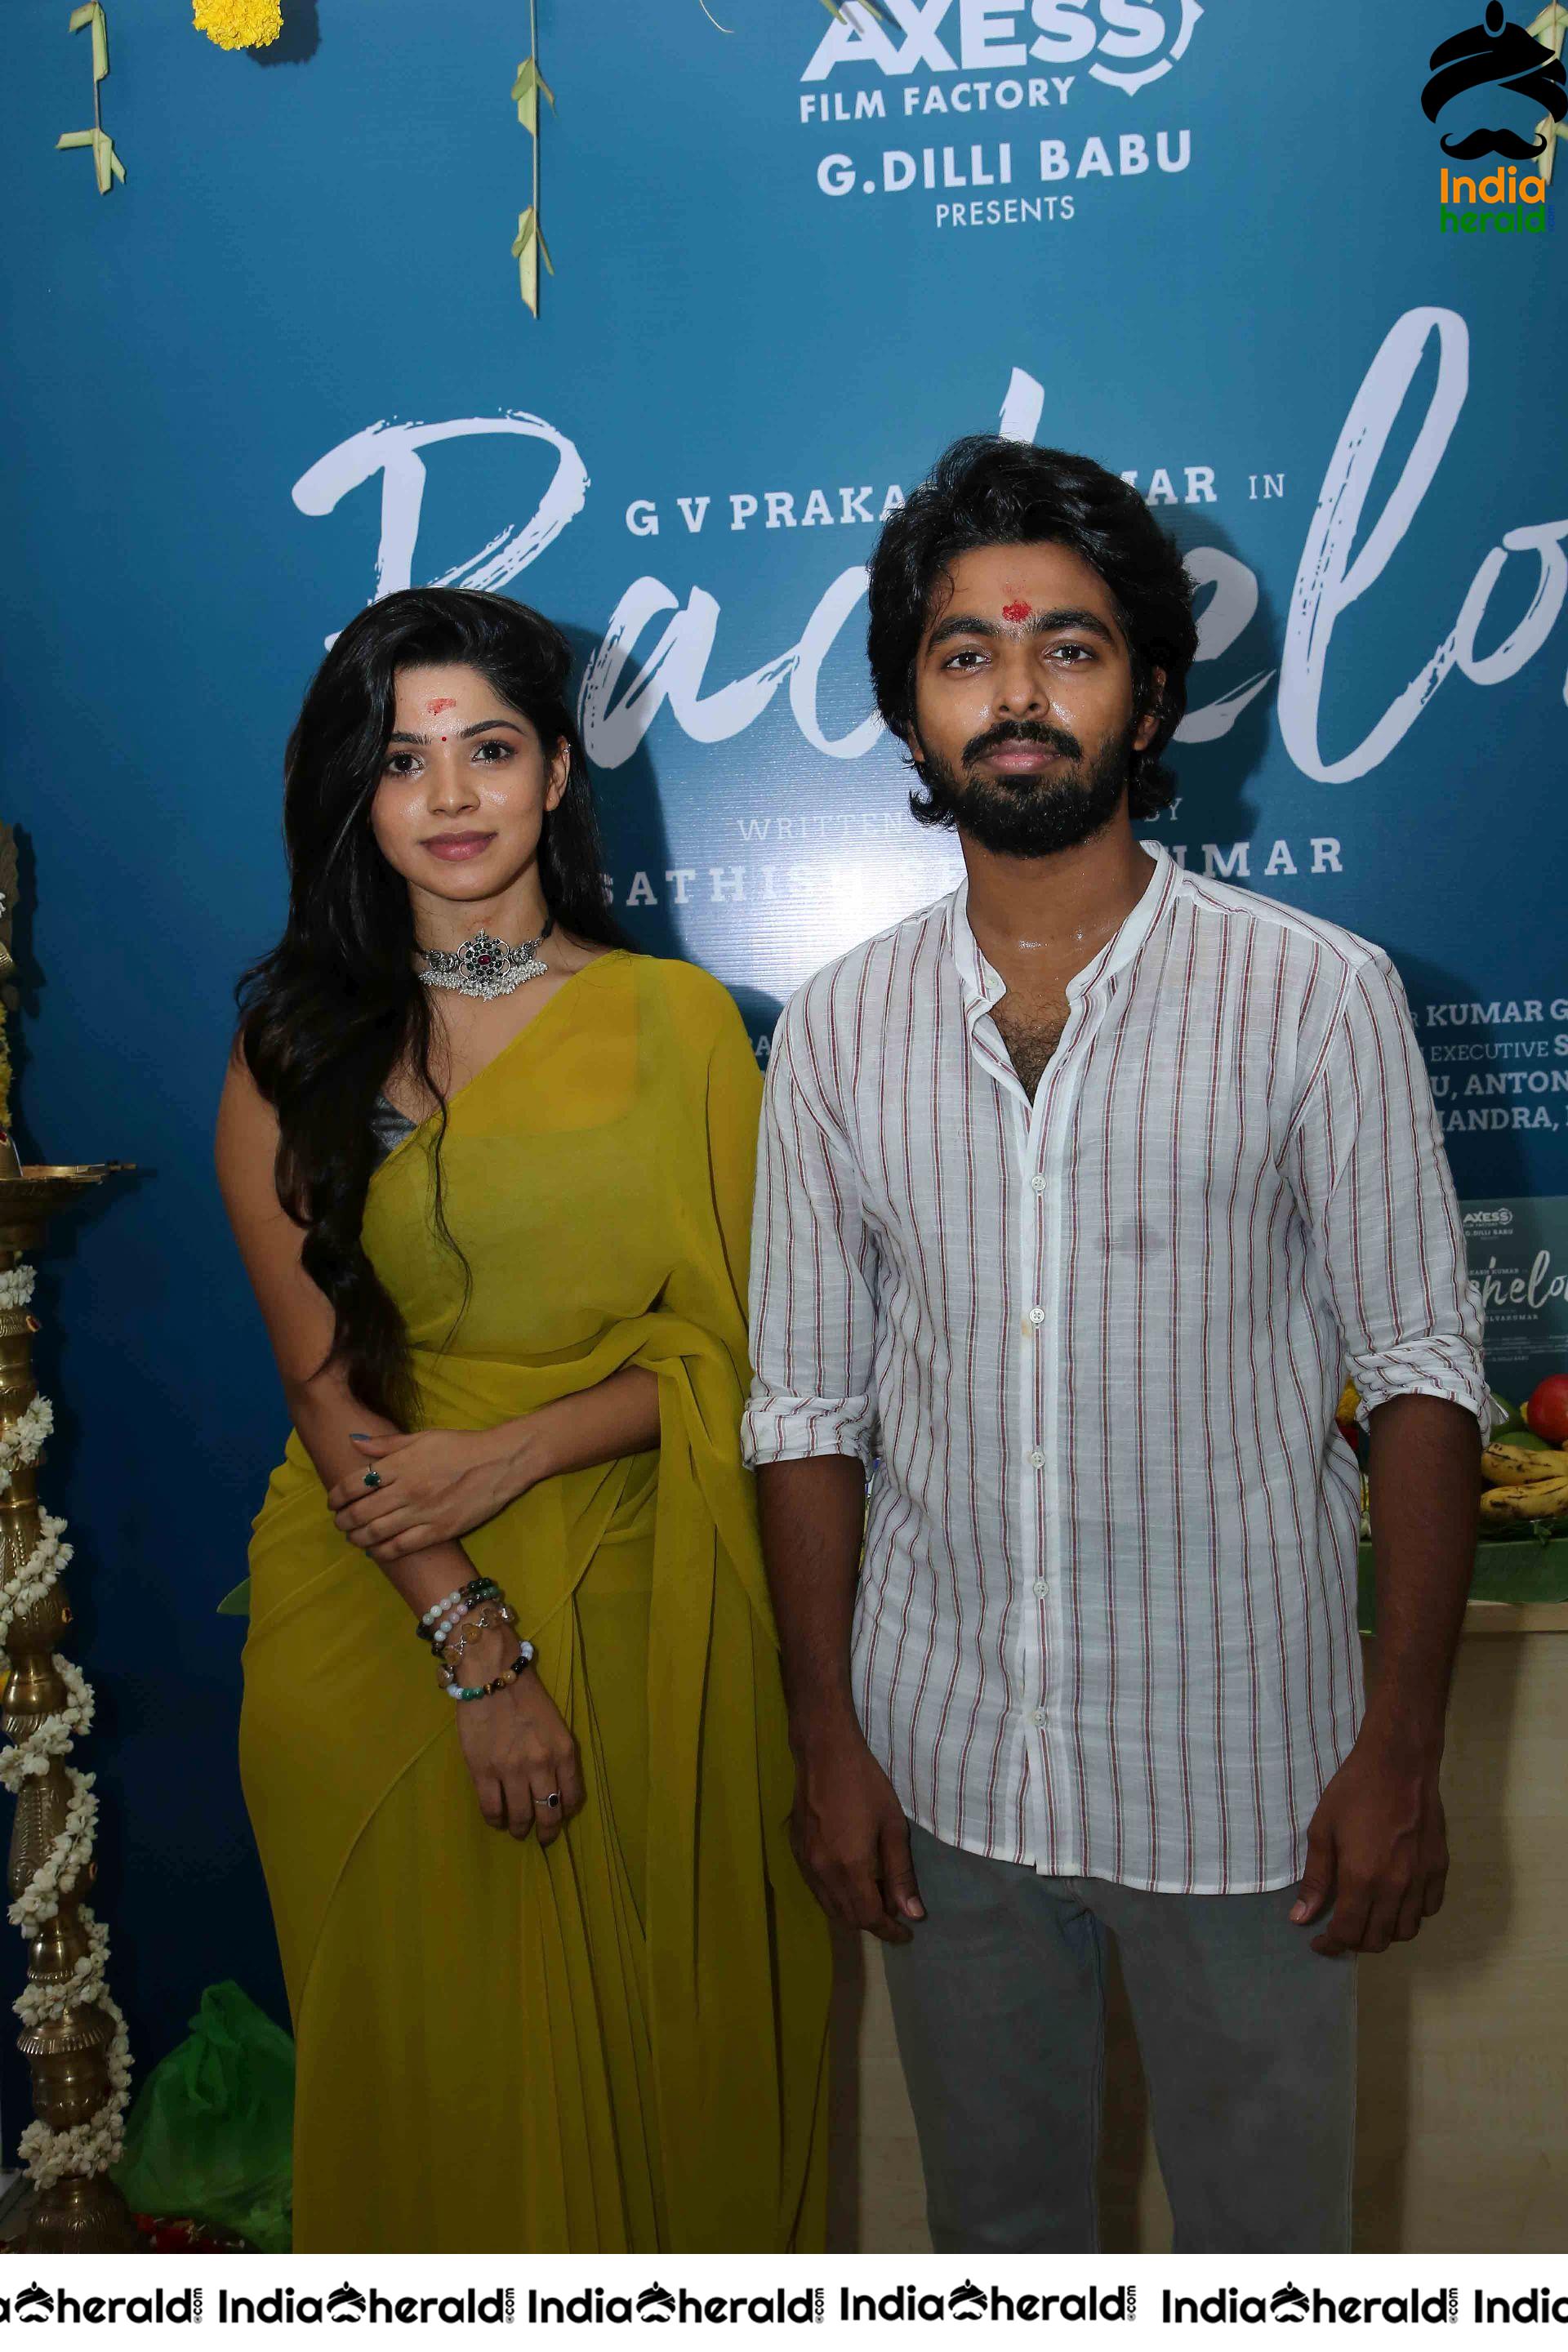 GV Prakash In Bachelor Movie Launched With A formal pooja